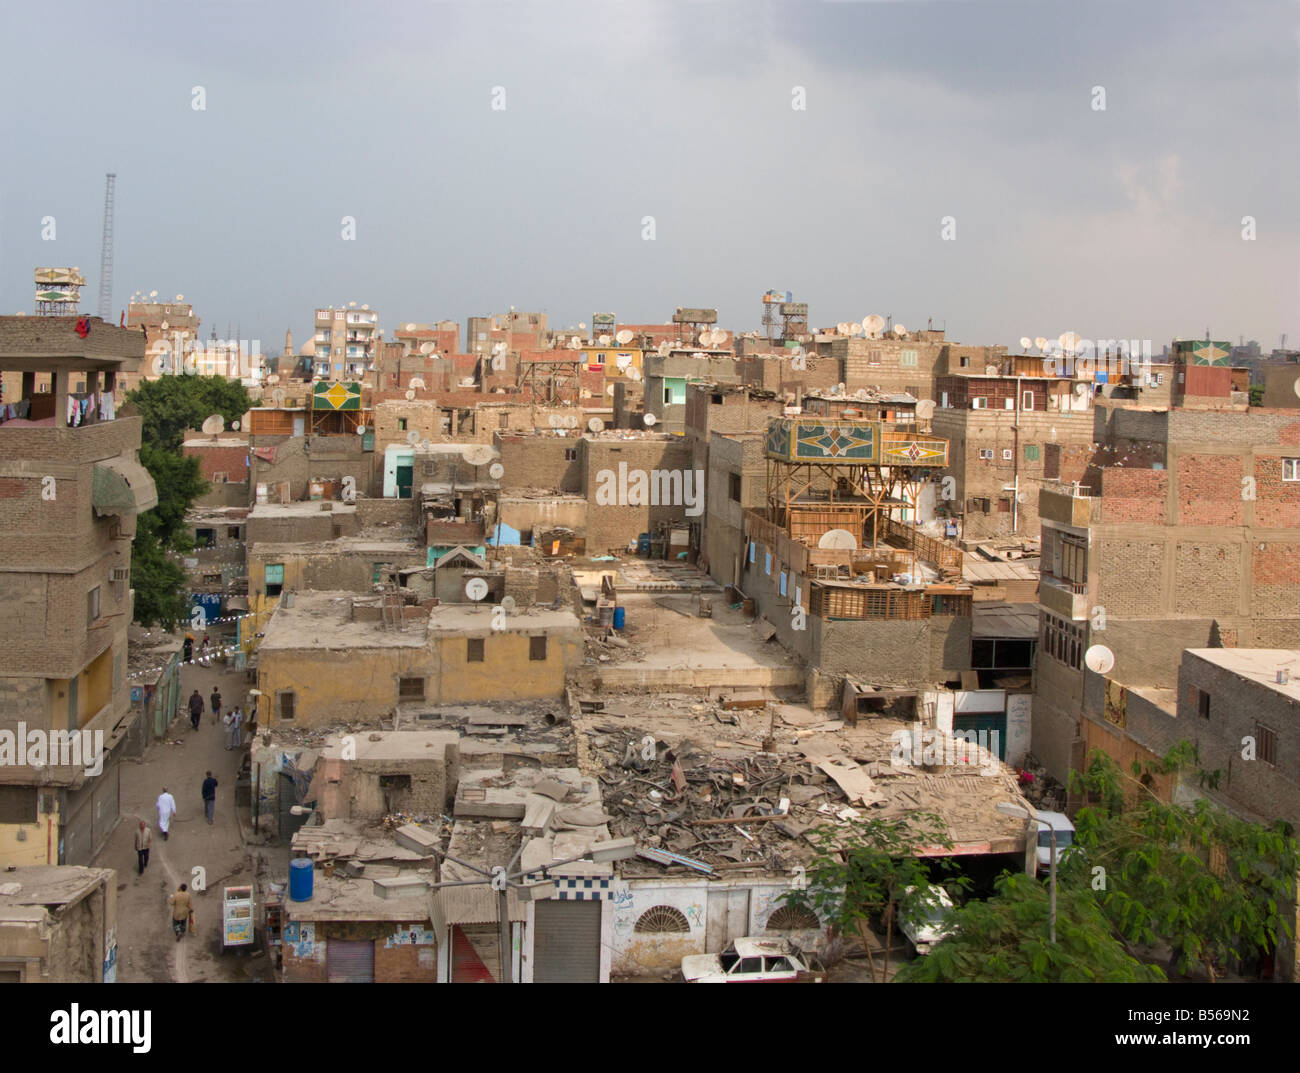 lower class housing in northern cemetery, Cairo, Egypt Stock Photo